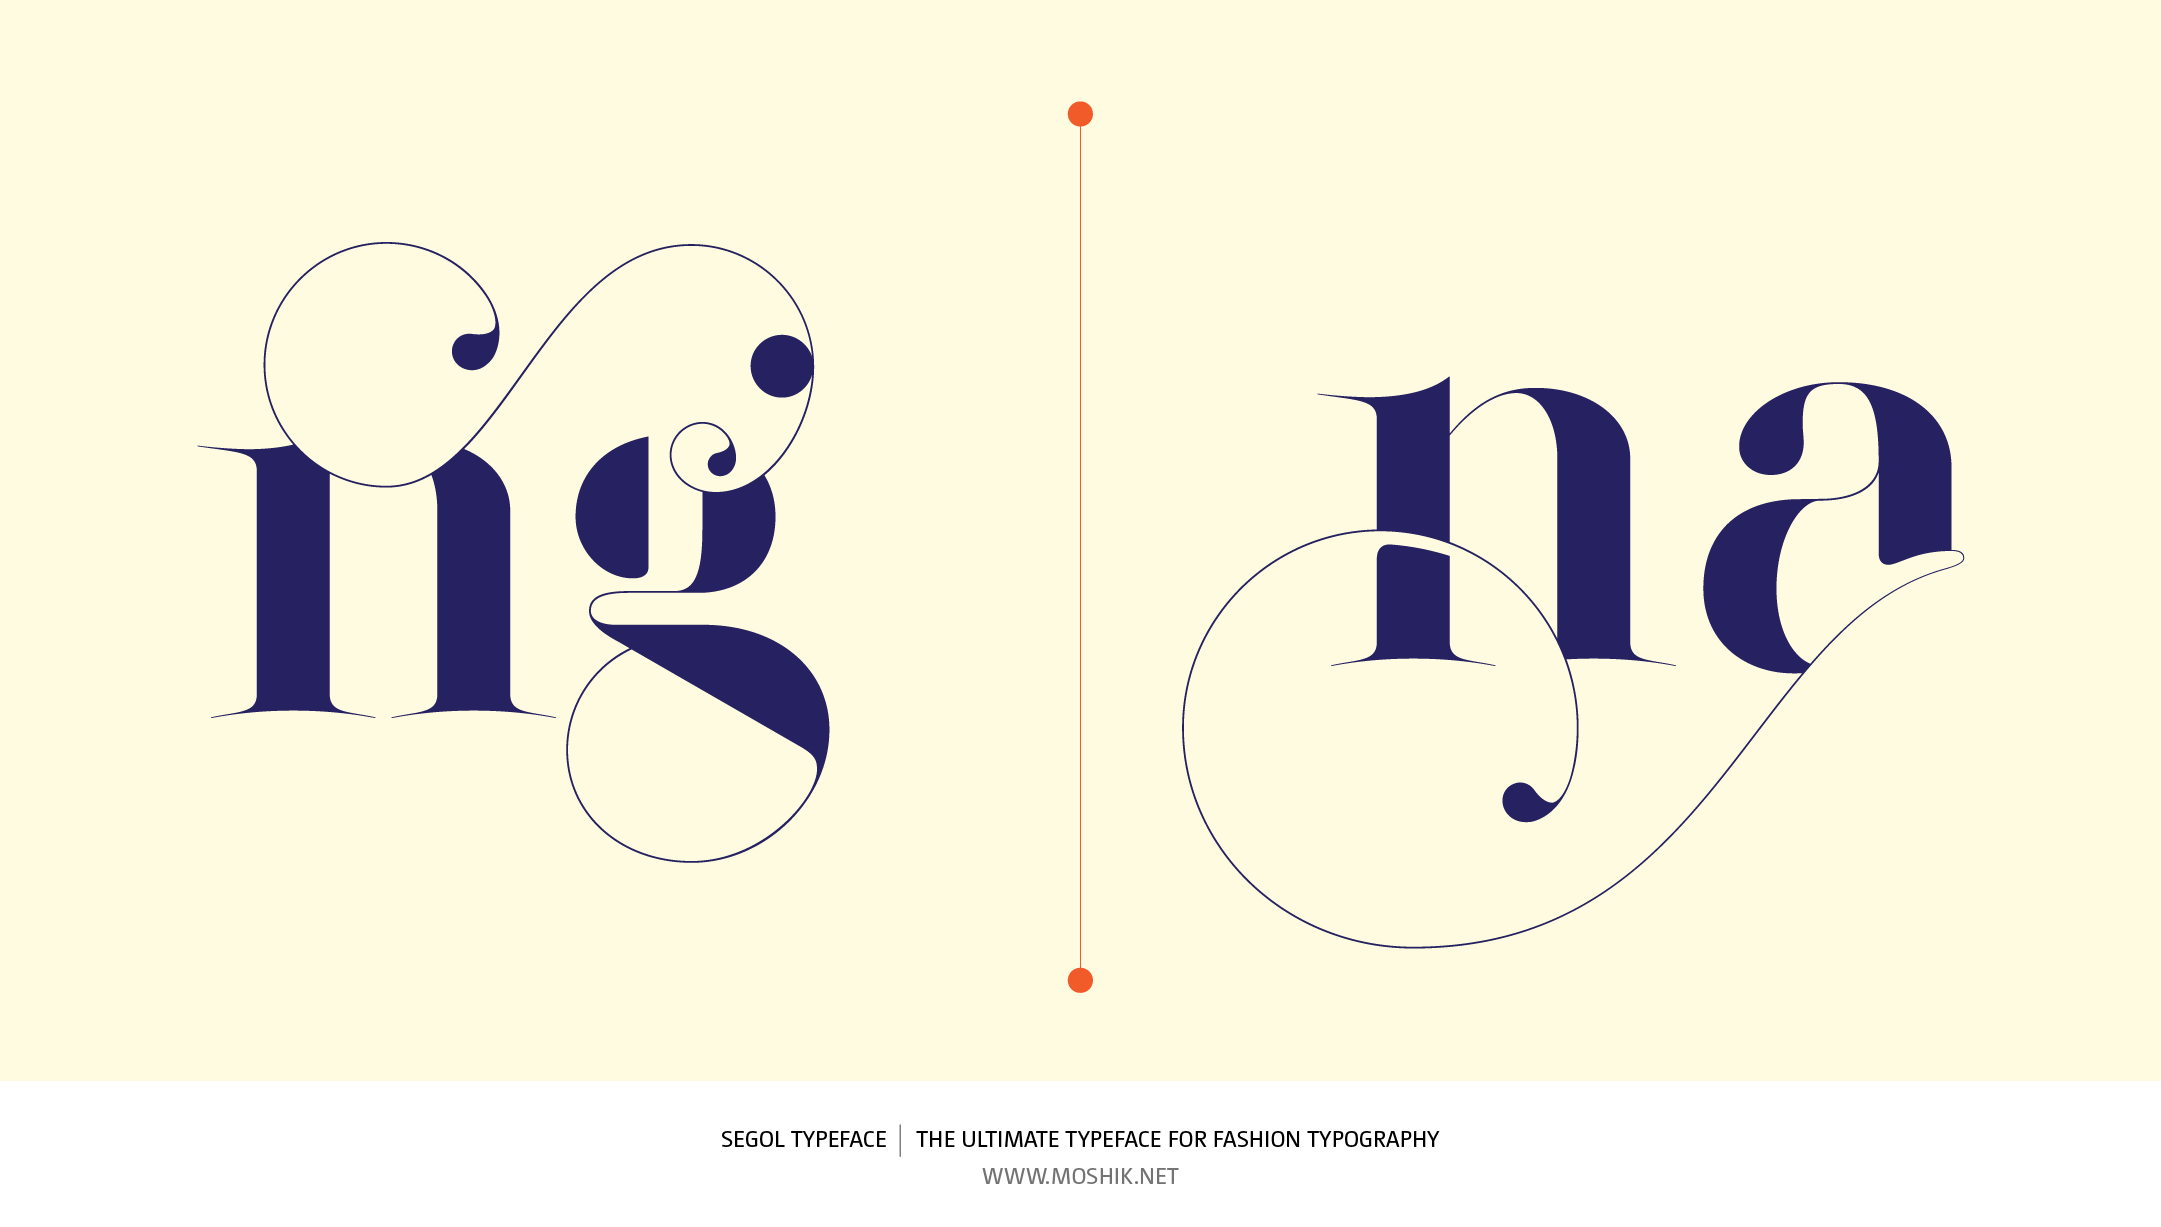 ng. na, Segol Typeface, New, ligature, Vogue, elle, Esquire, logos, custom, fashion typography, sexy logos, must have fonts 2021, best fonts 2021, best logos 2021, Moshik Nadav, Fashion magazine Typography, Fashion logos, Fashion fonts, Luxury logos designer, luxury fonts, luxury packaging design, makeup fonts, cosmetics branding